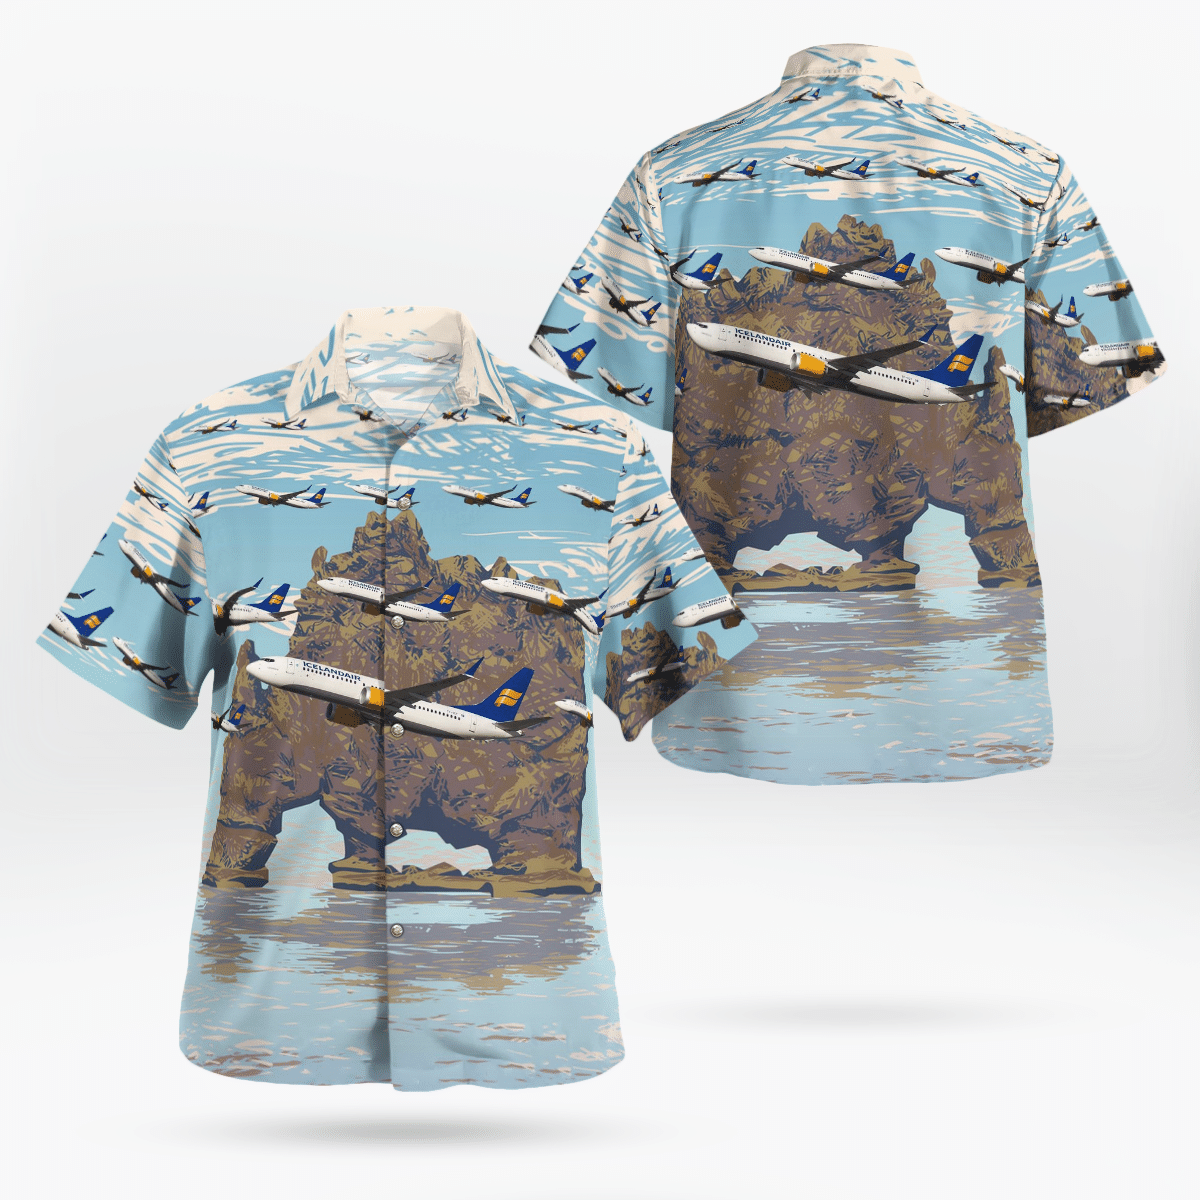 If you're a fan of Hawaiian Shirt, you can choose one in our store 111